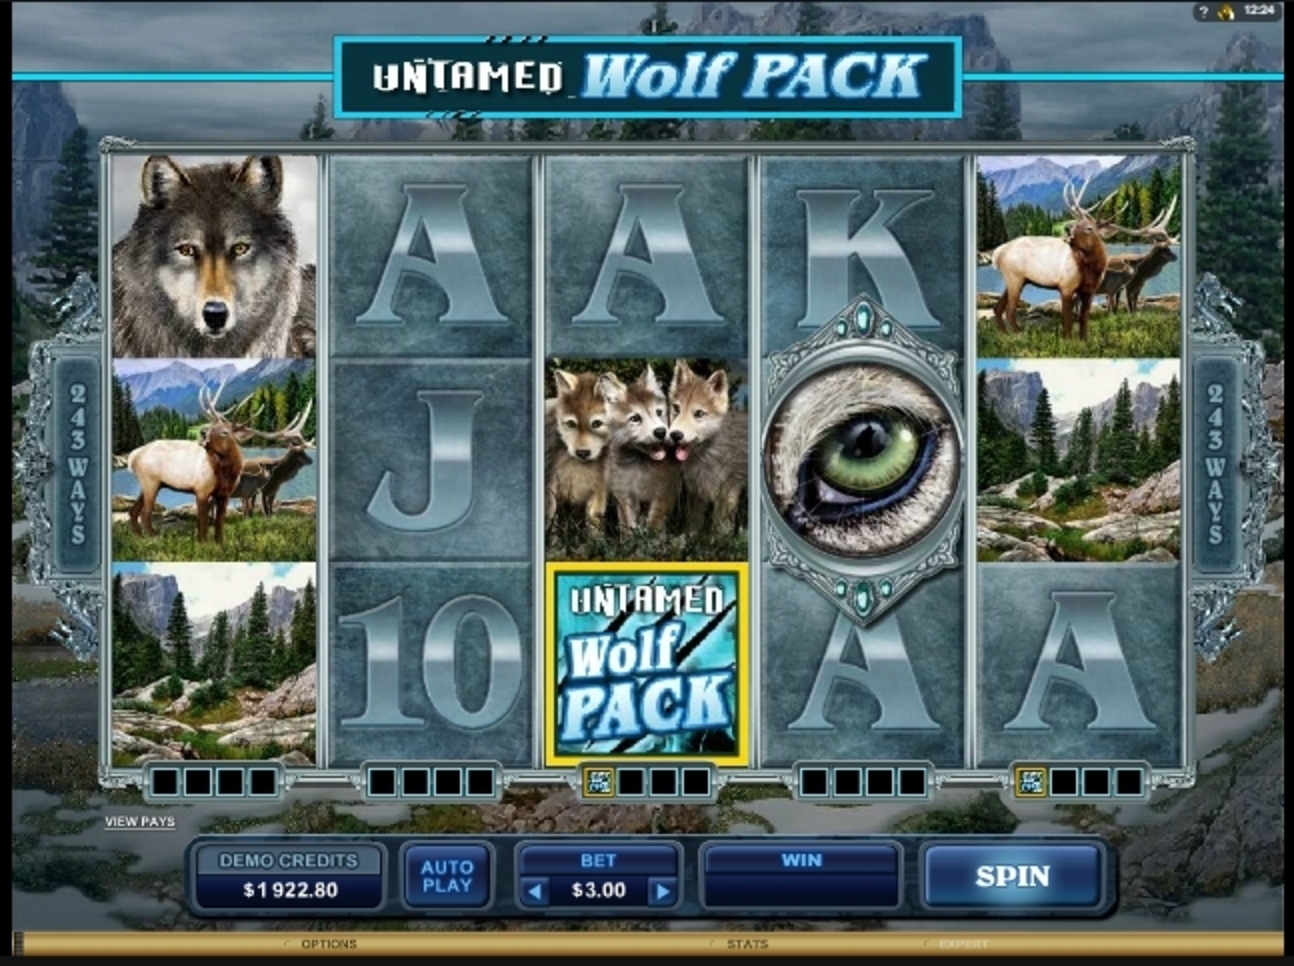 Win Money in Untamed Wolf Pack Free Slot Game by Microgaming